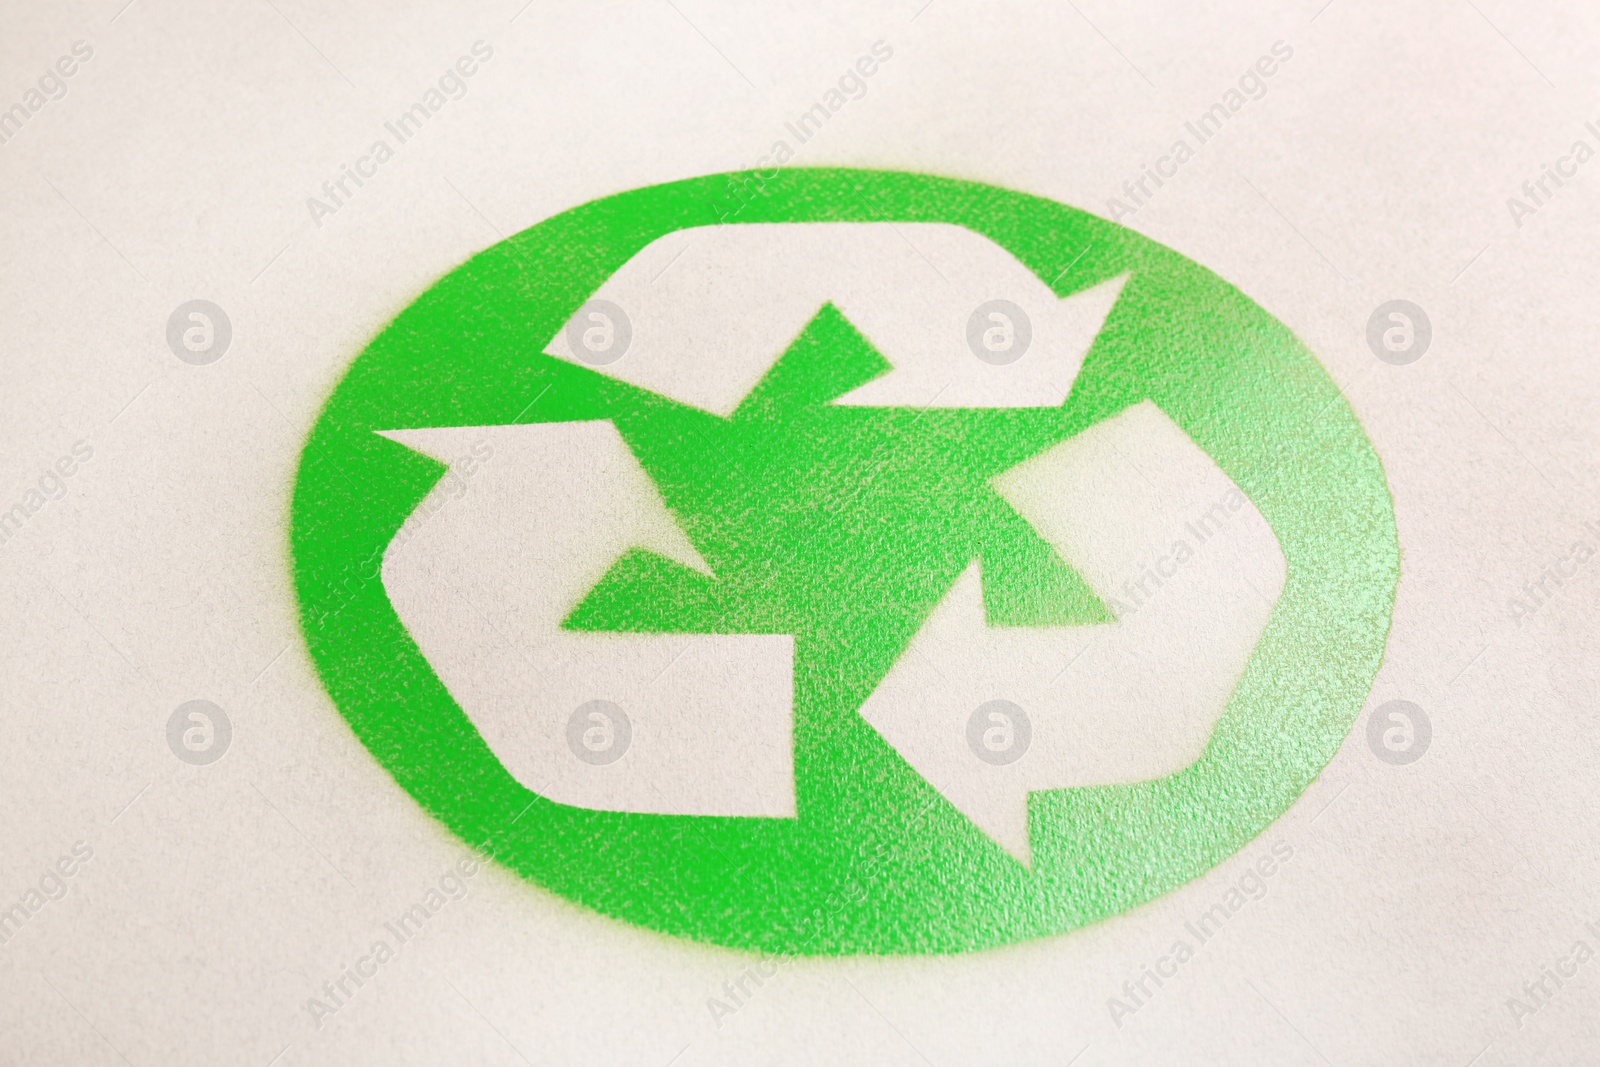 Photo of Recycling symbol on cardboard paper. Waste reuse concept